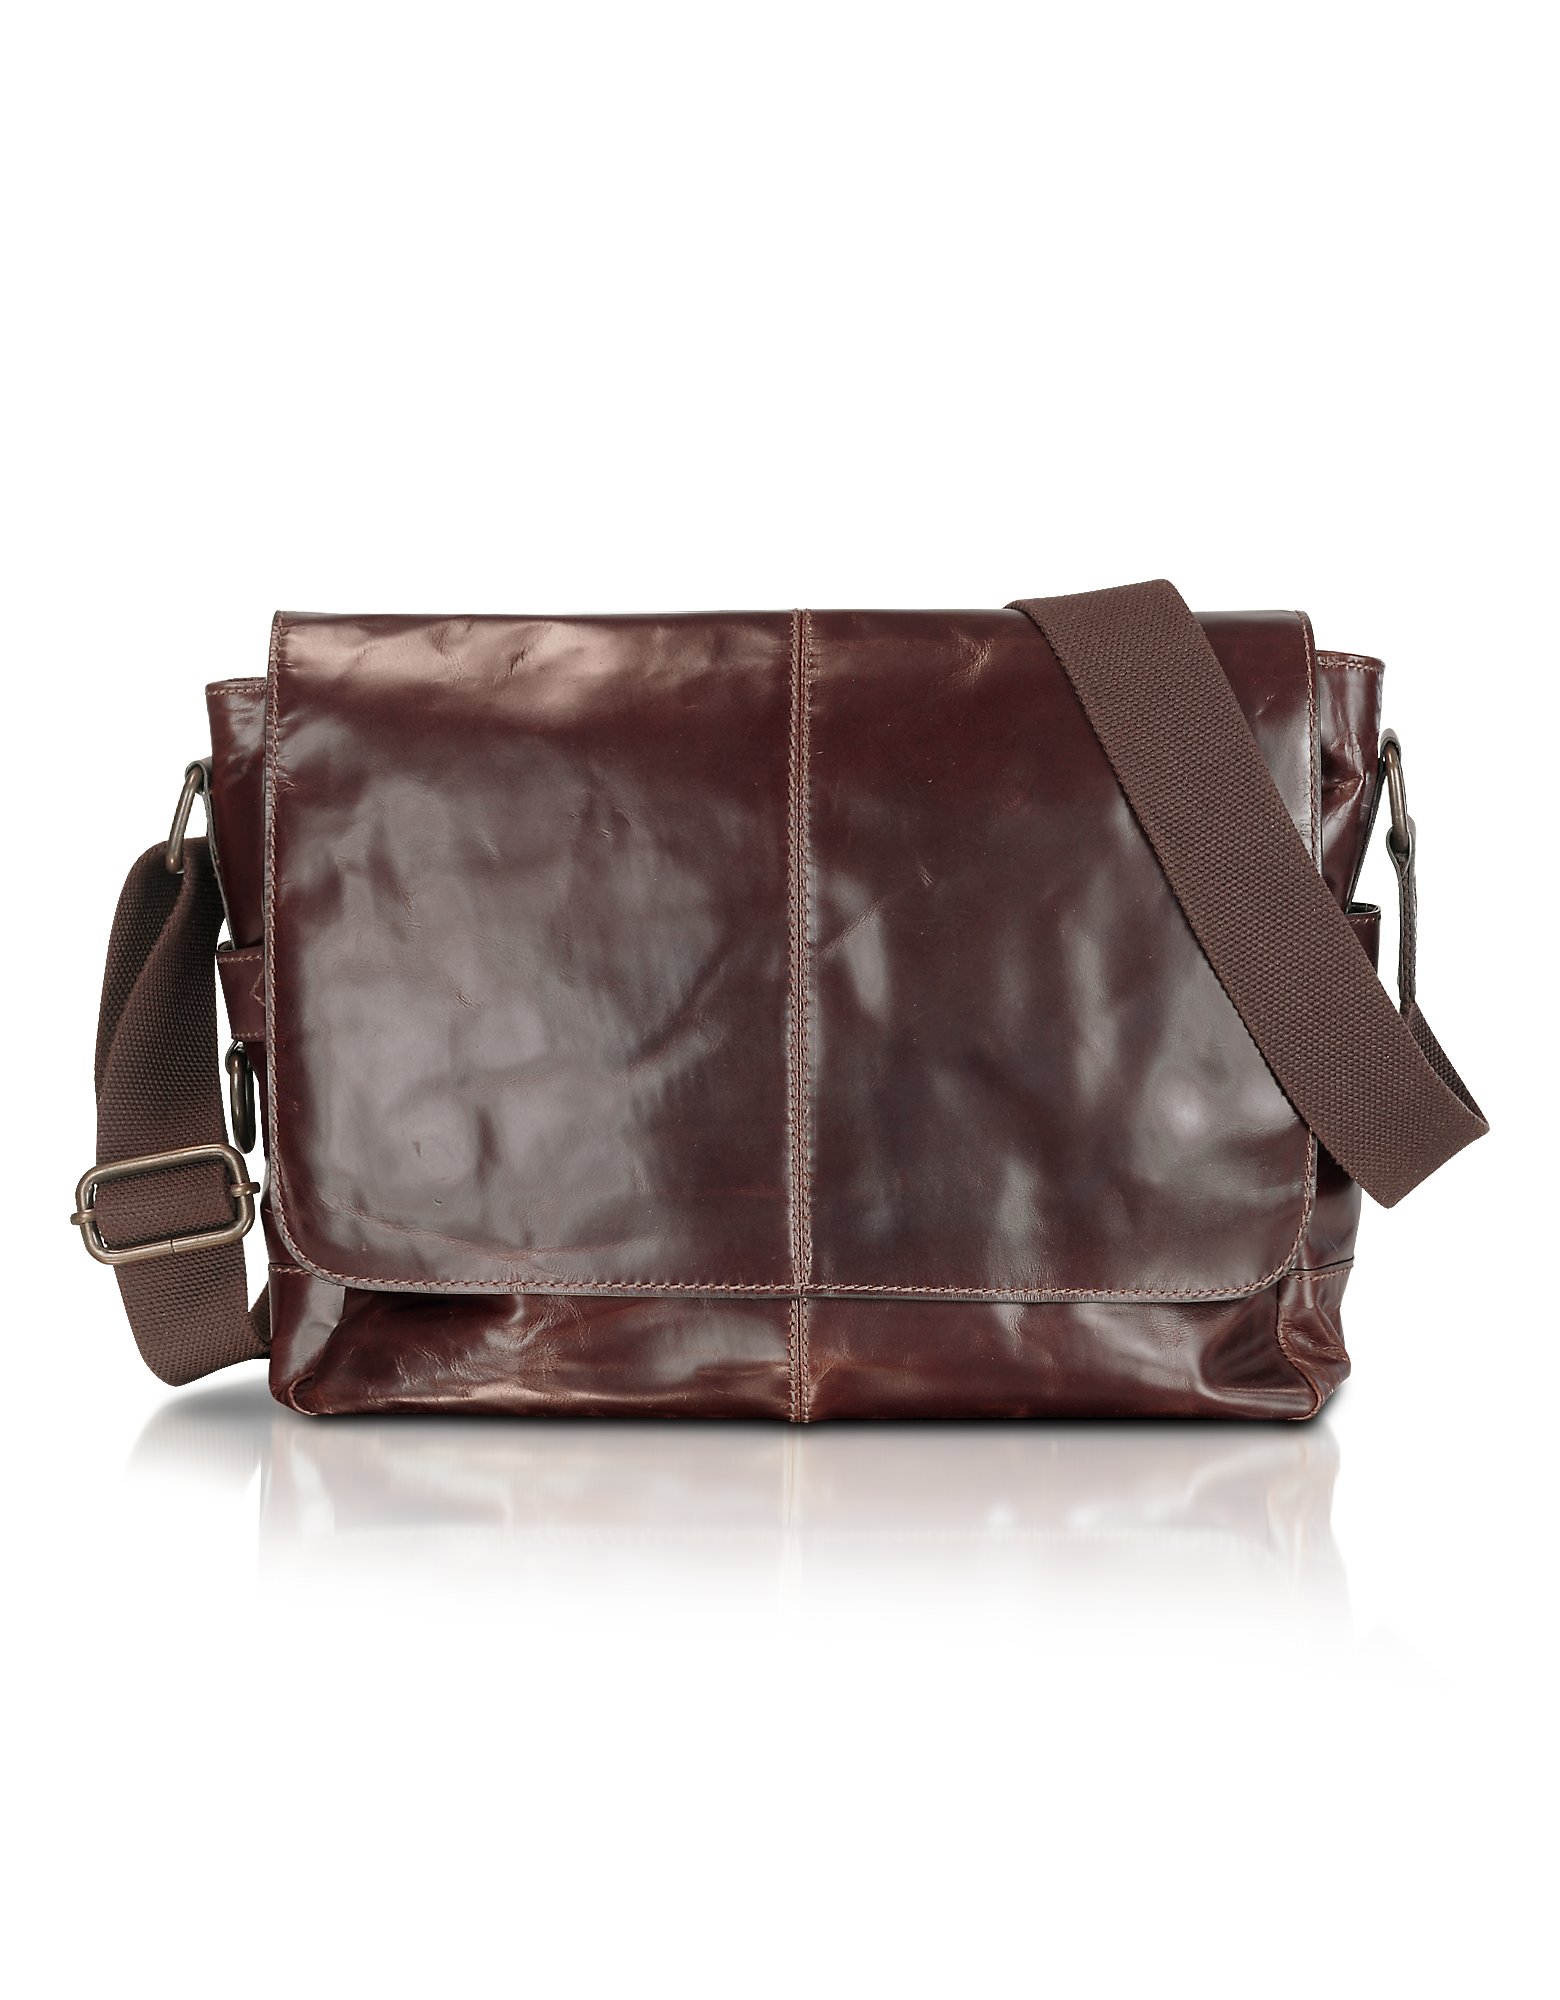 Lyst - Fossil Jackson Ew - Leather Laptop Messenger Bag in Brown for Men